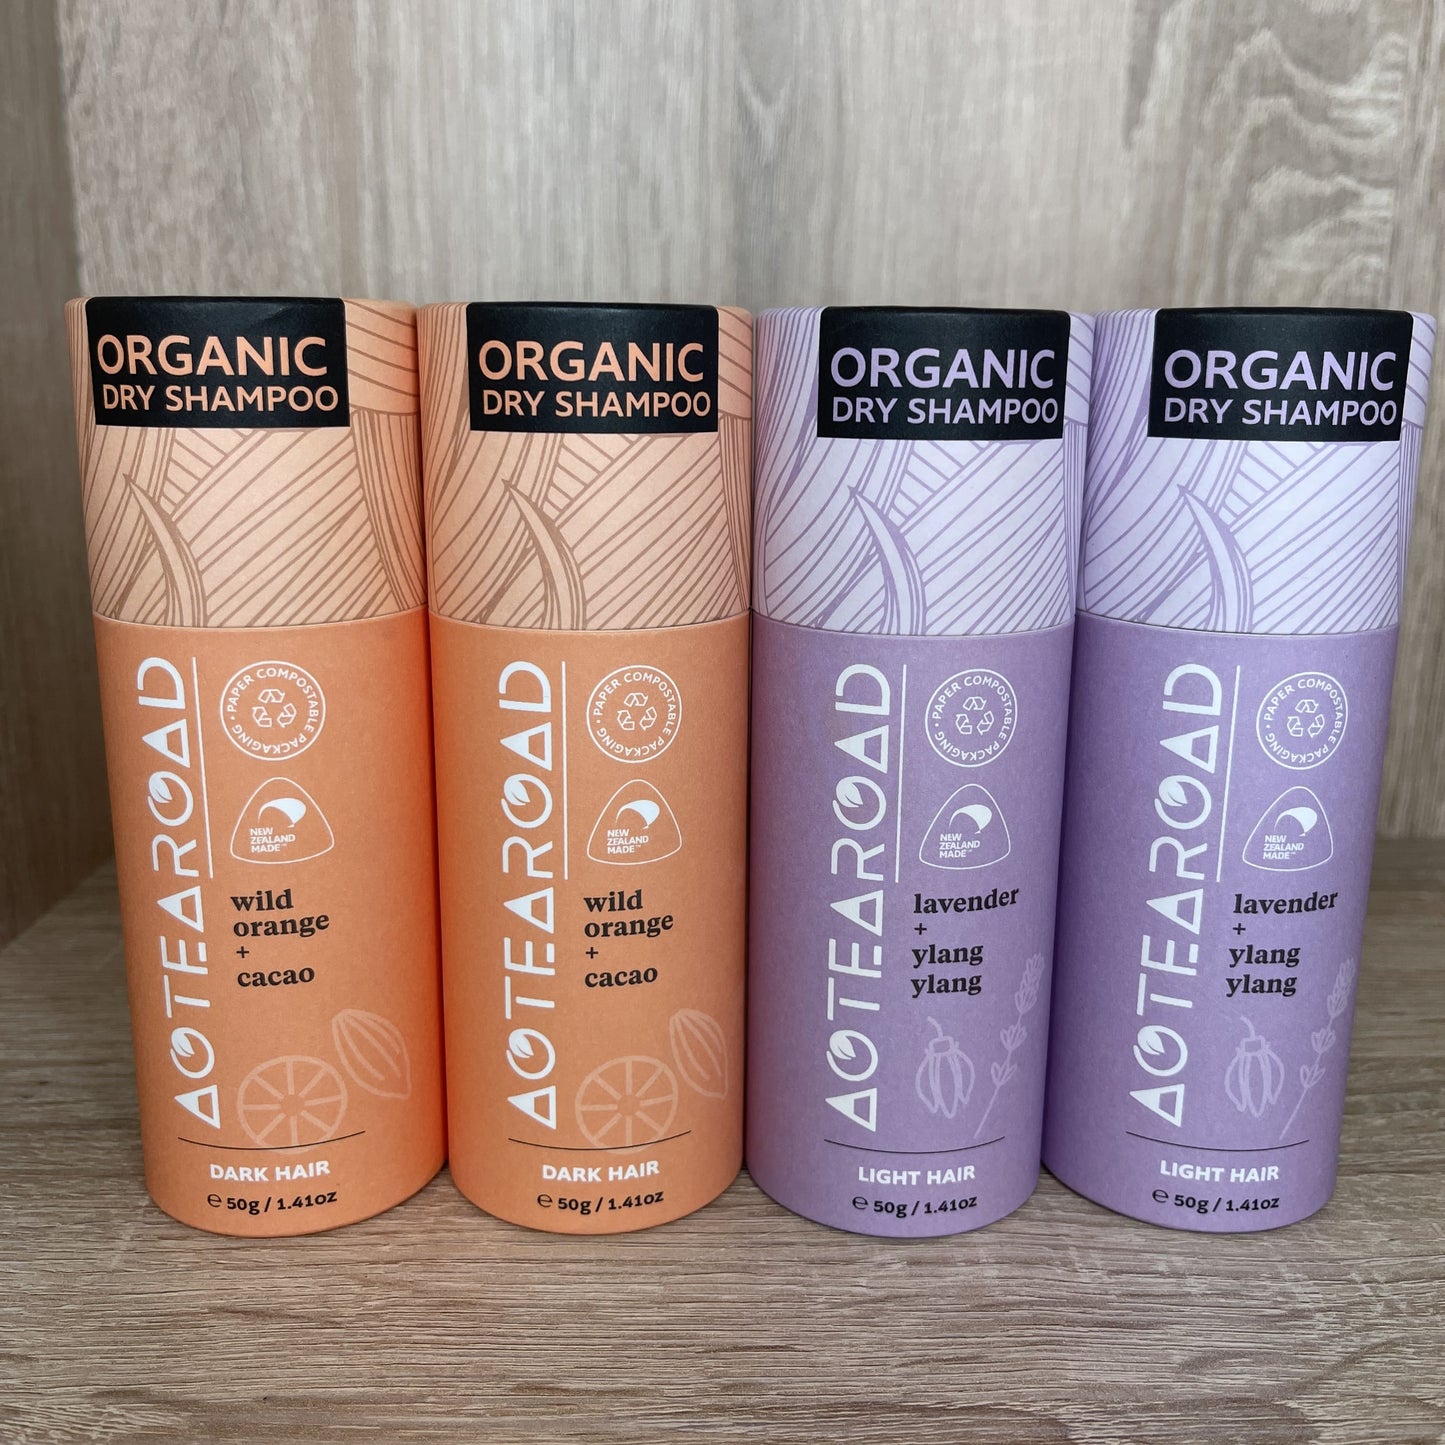 Organic dry shampoo for light and dark hair in a cardboard tube from Aotearoad.